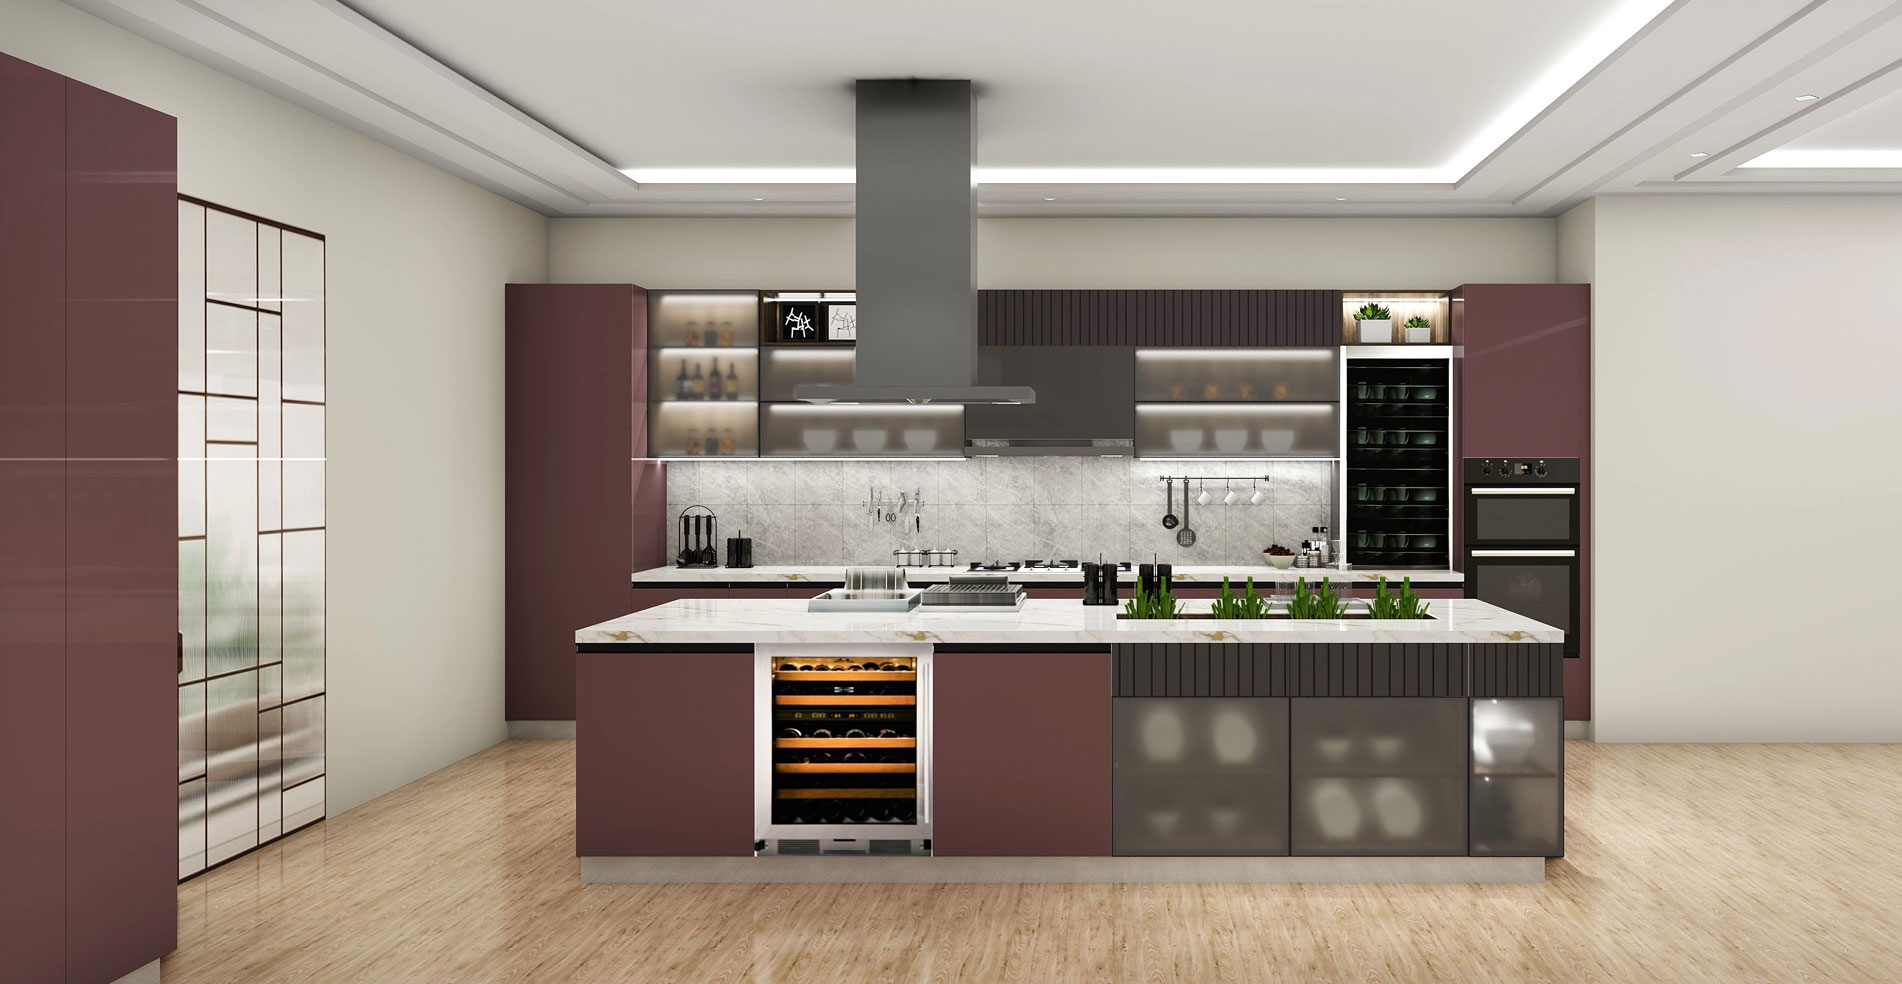 Modular Kitchen Design With Affordable Price